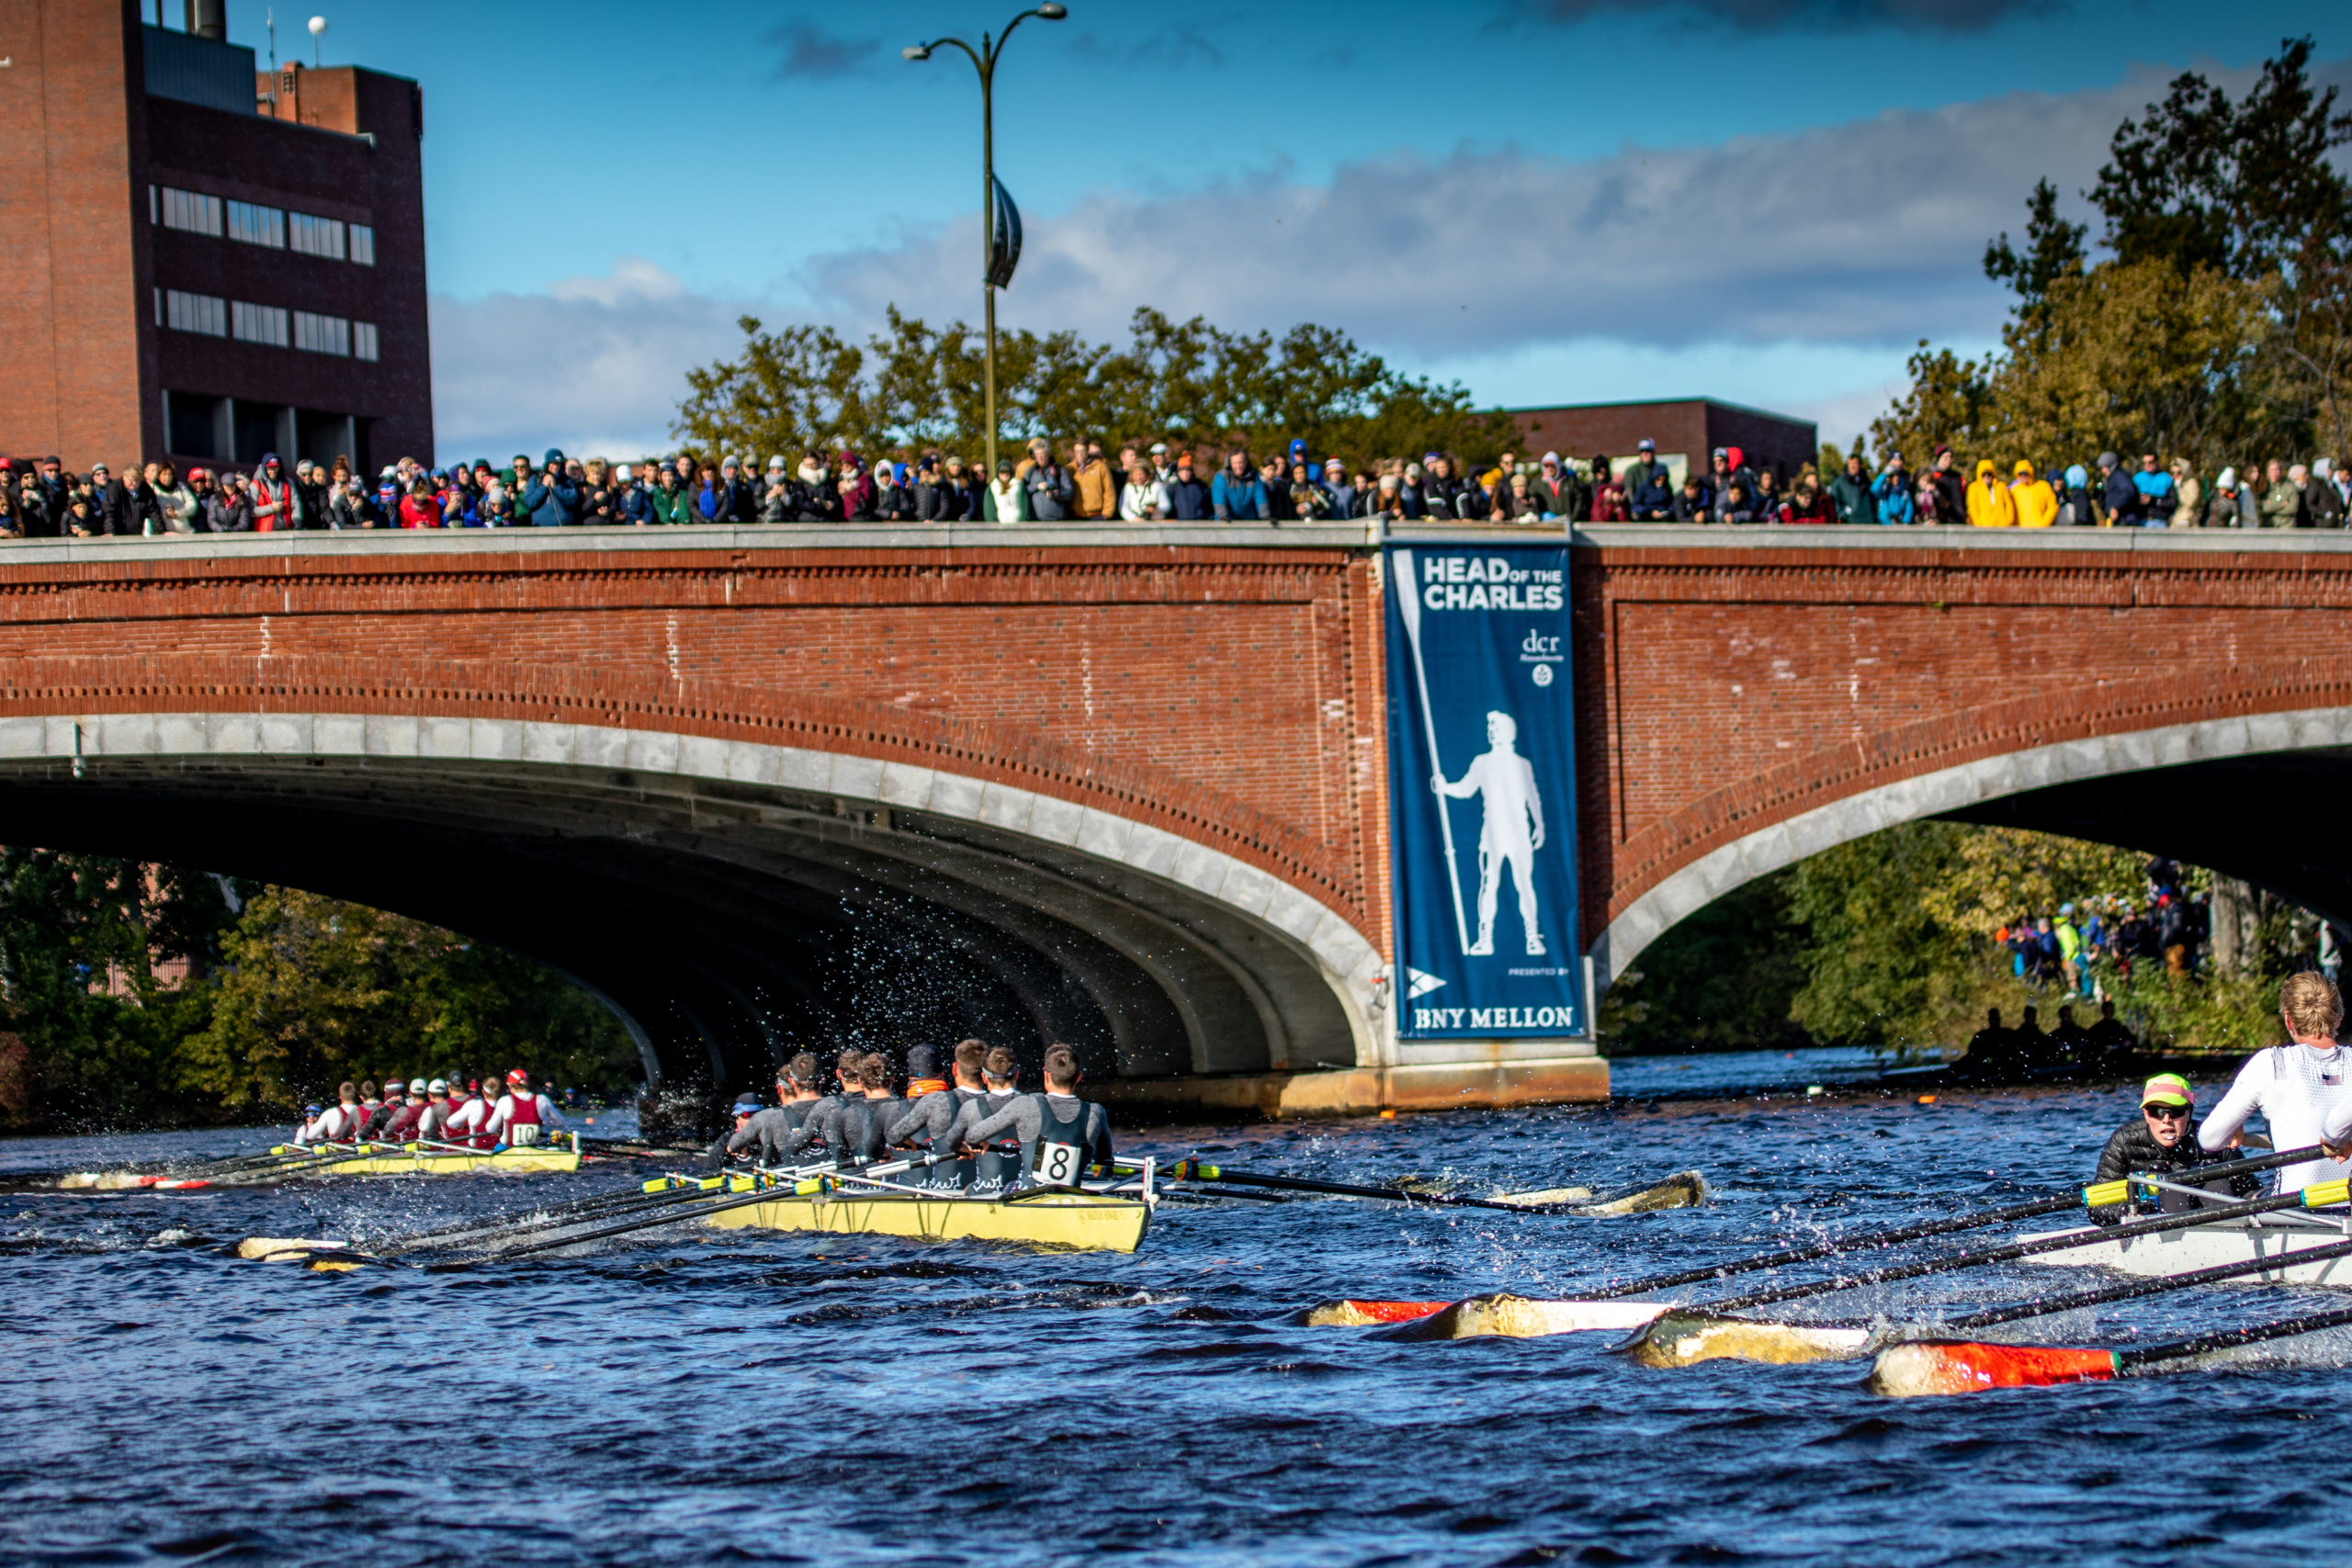 BNY Mellon Returns for Fifth Year as the Lead Sponsor for the 53rd Head Of The Charles® Regatta